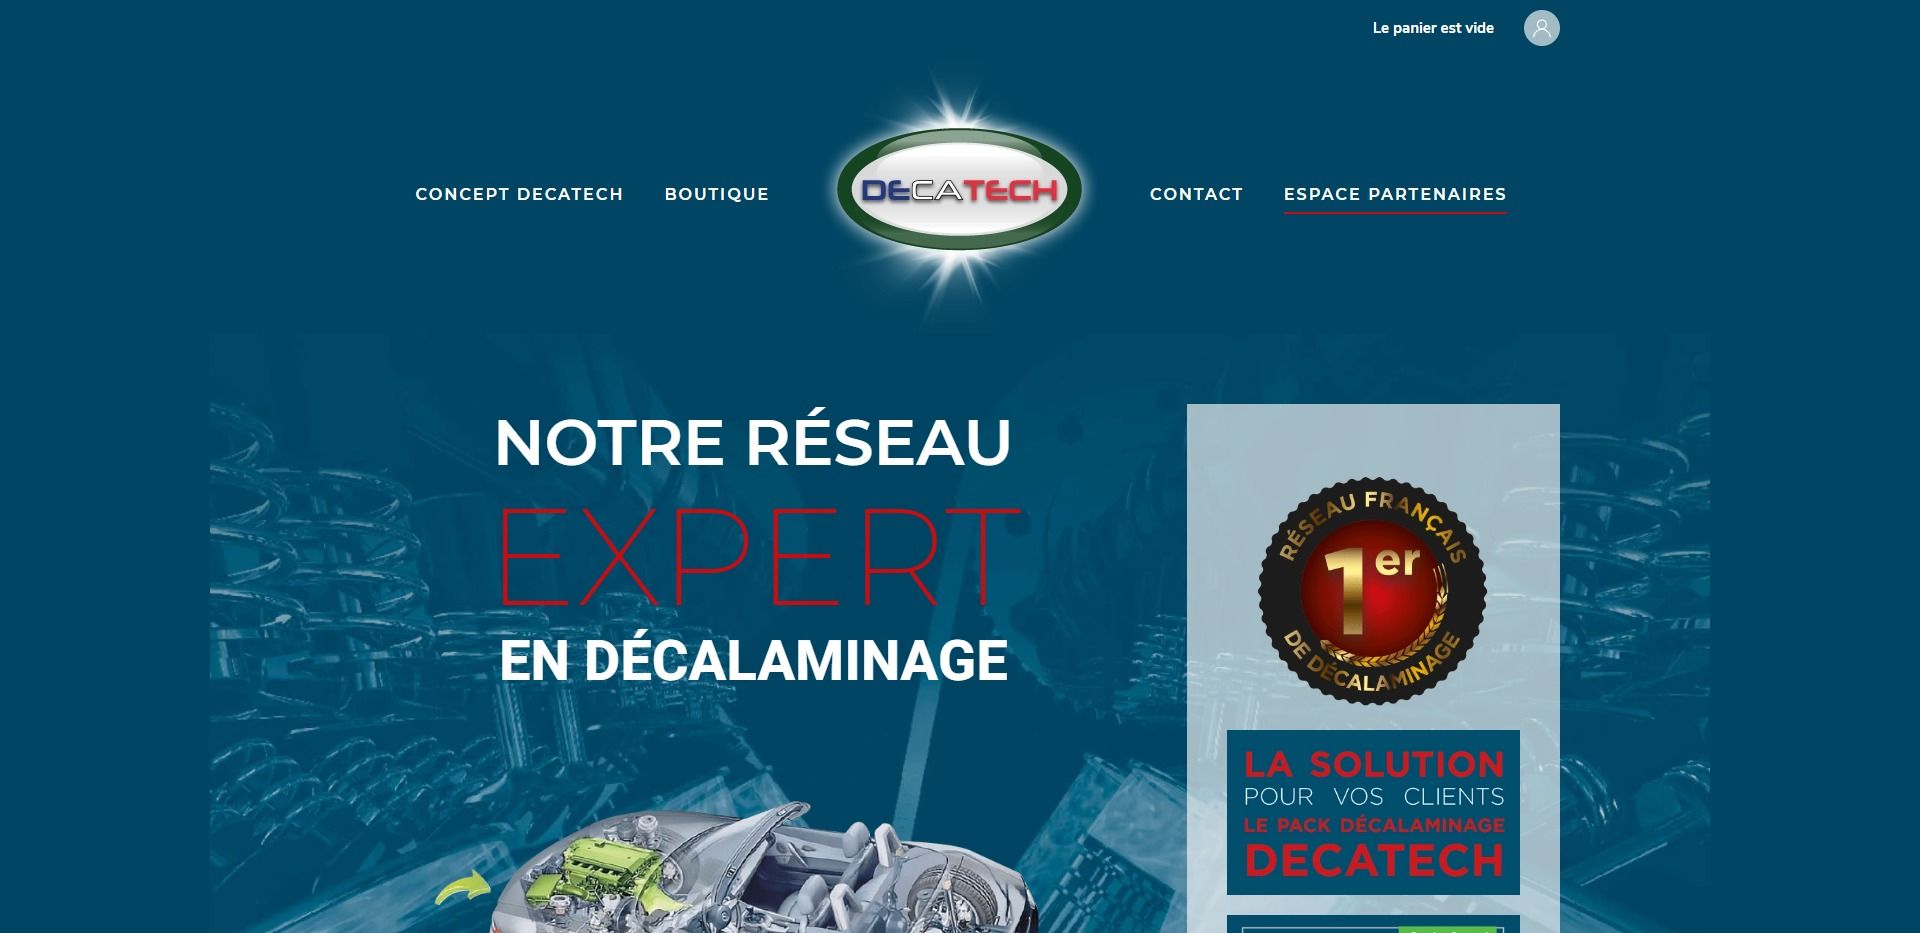 Image site Decatech